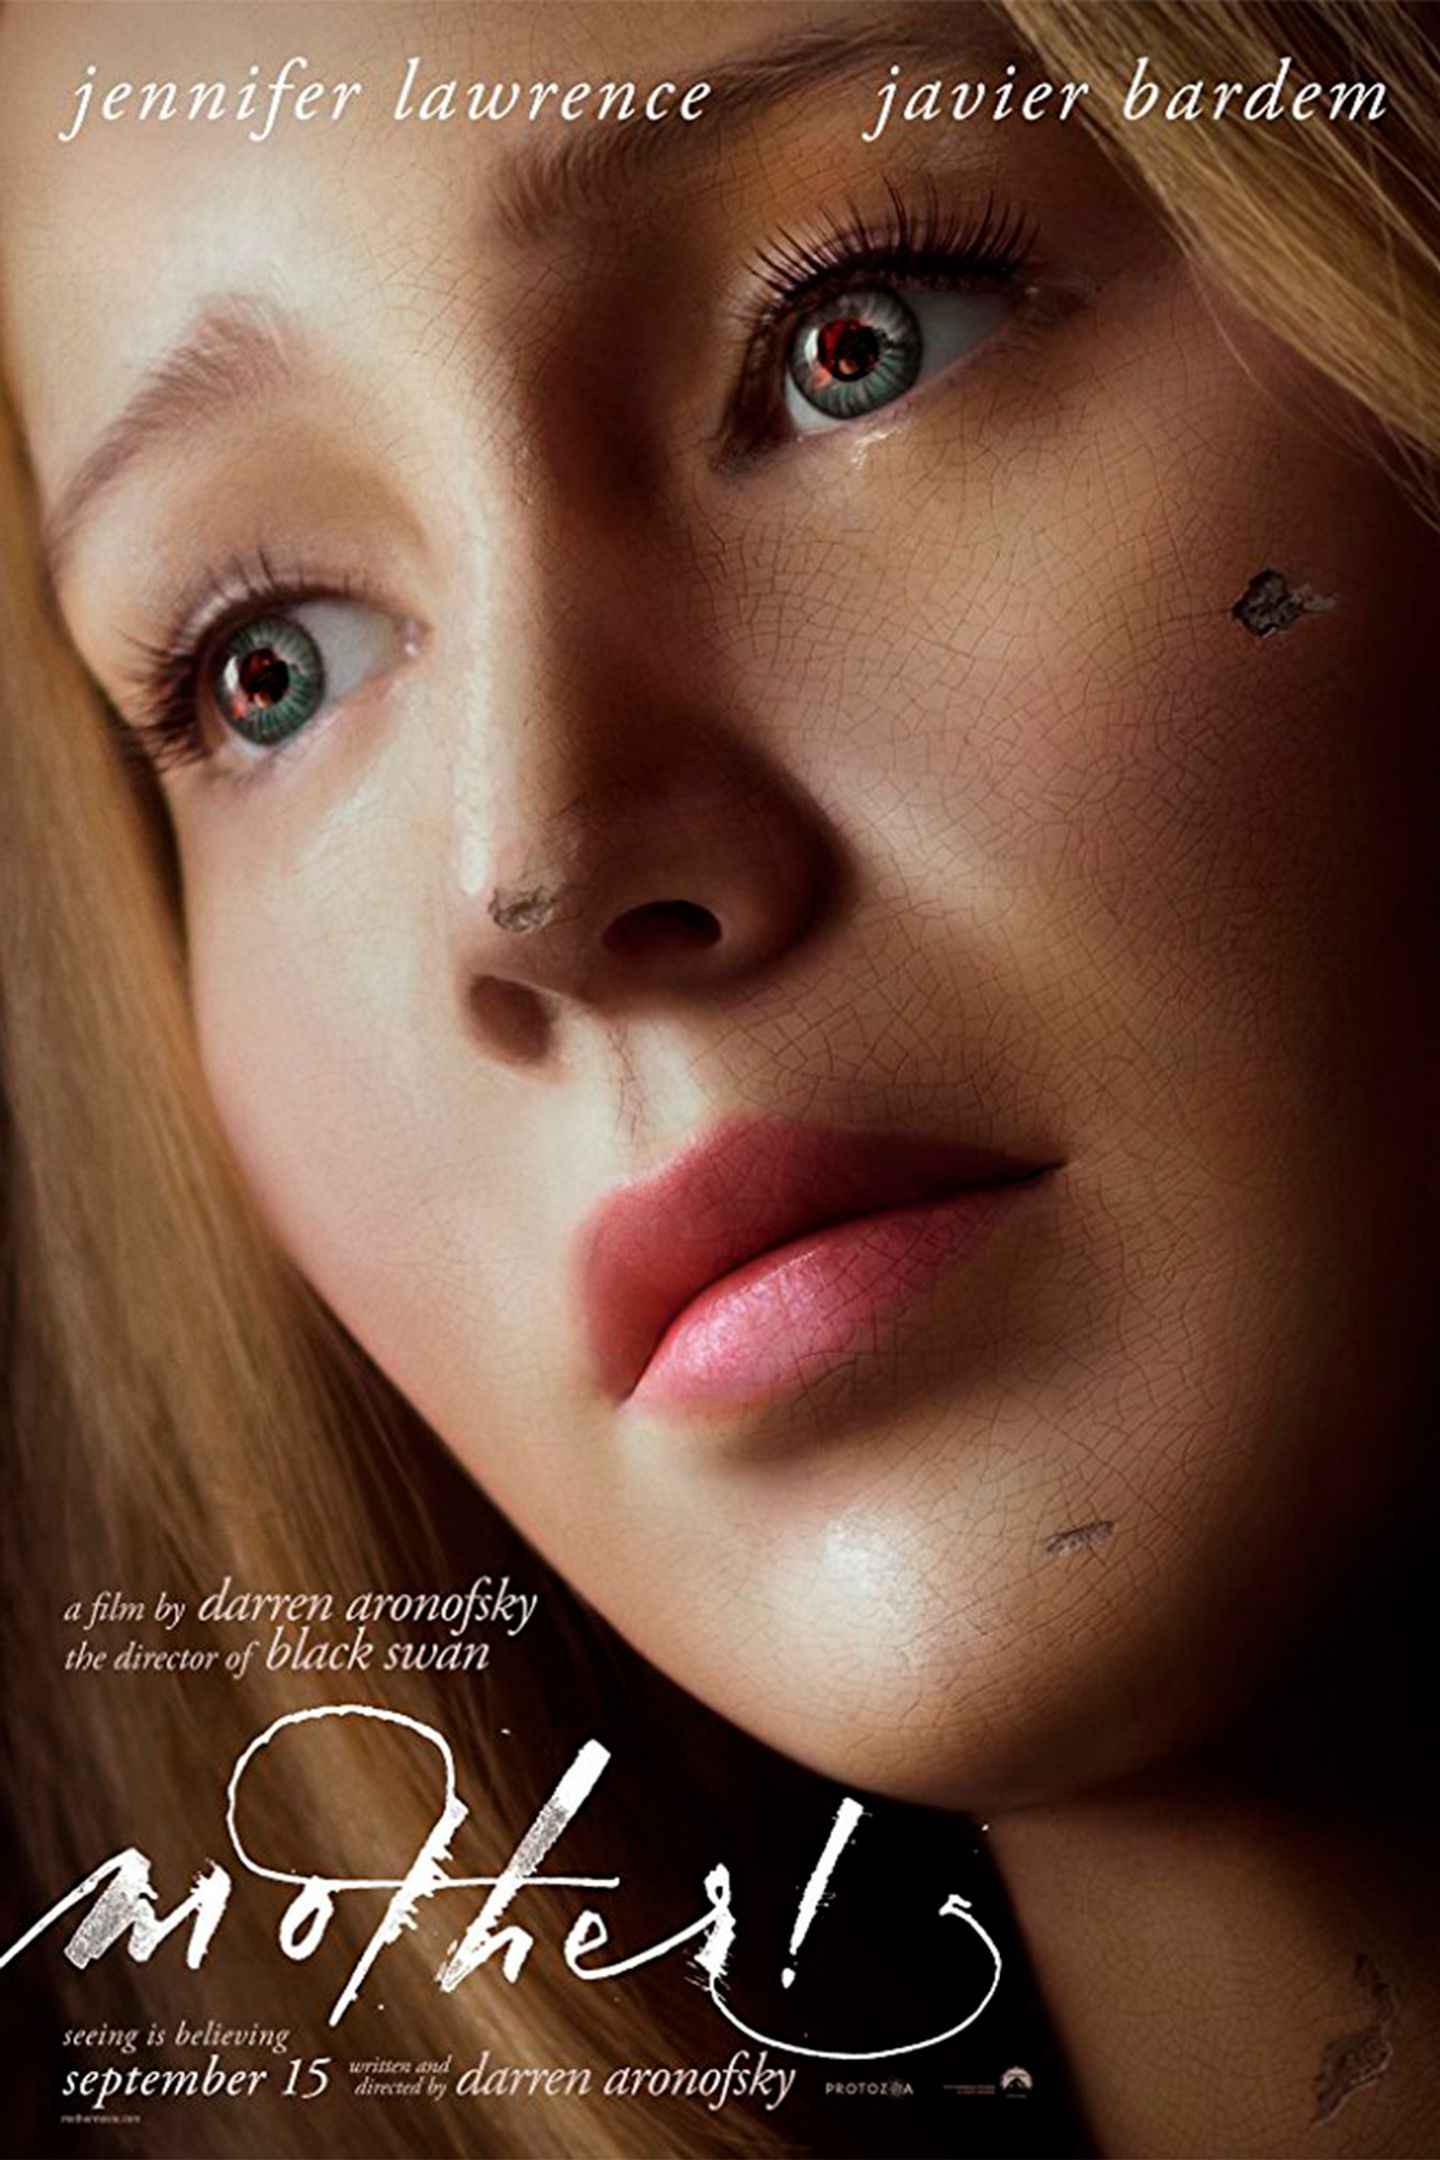 Plakat for 'Mother!'